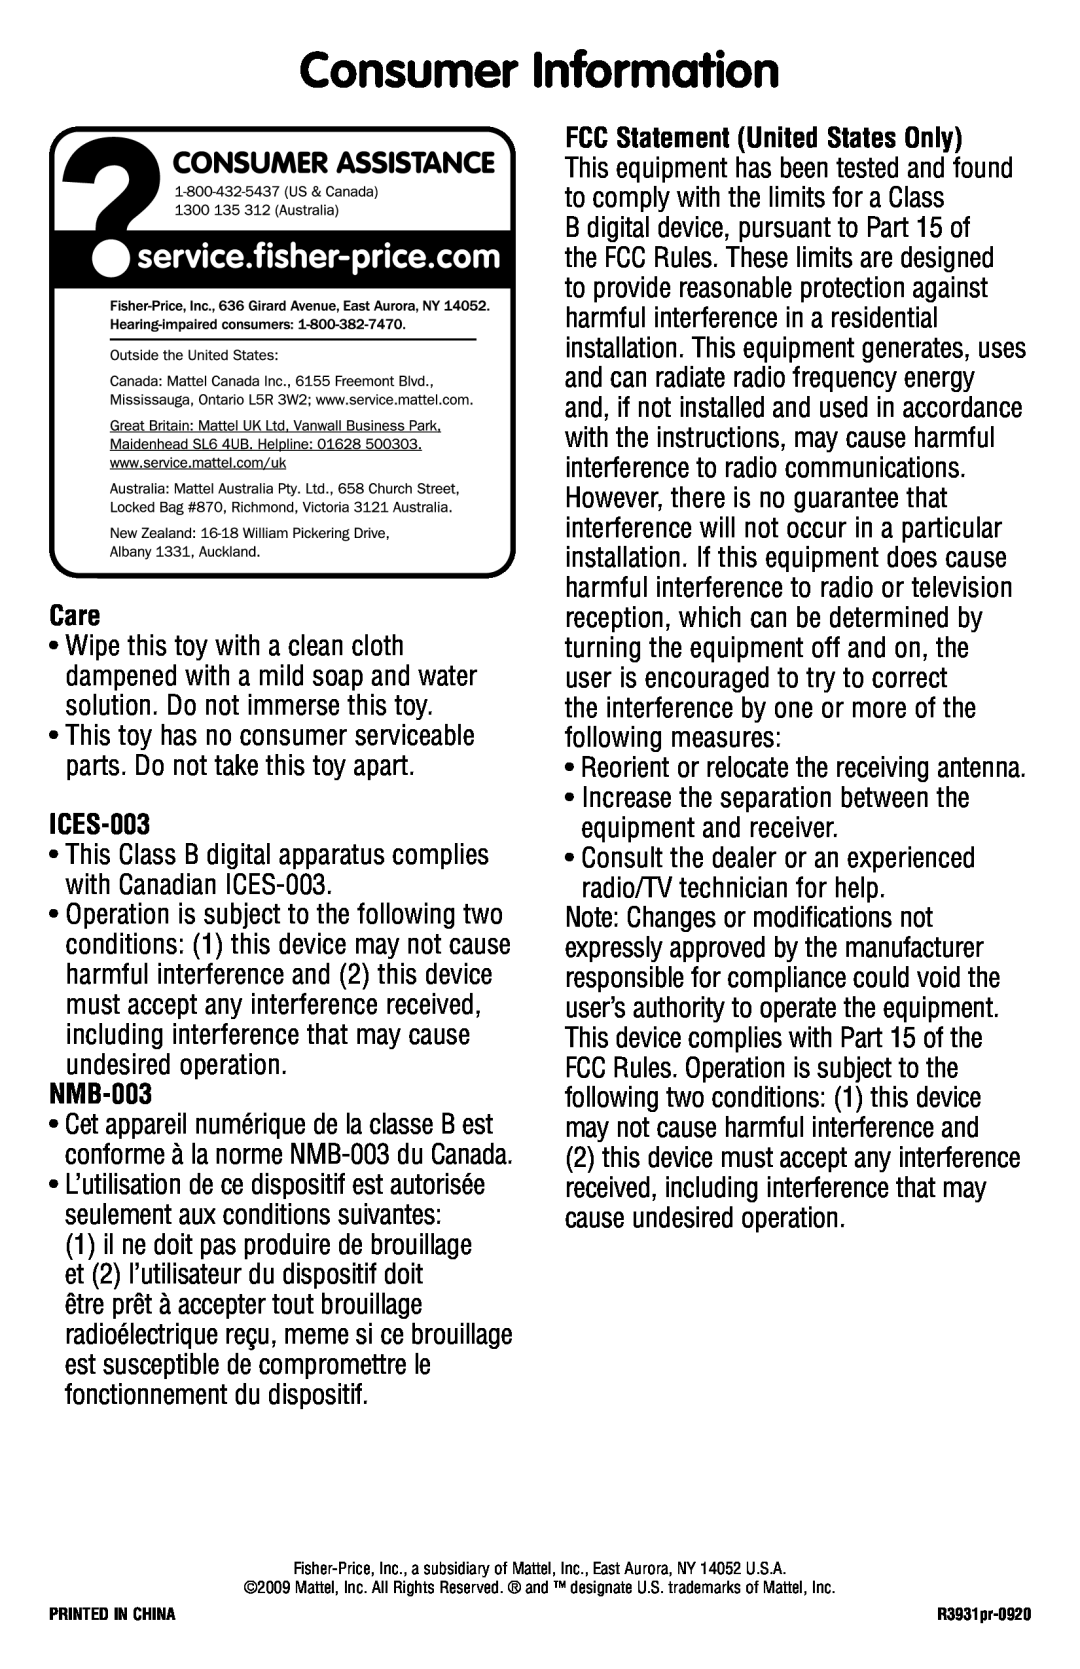 Fisher-Price R3931 Consumer Information, Care, This Class B digital apparatus complies with Canadian ICES-003, NMB-003 